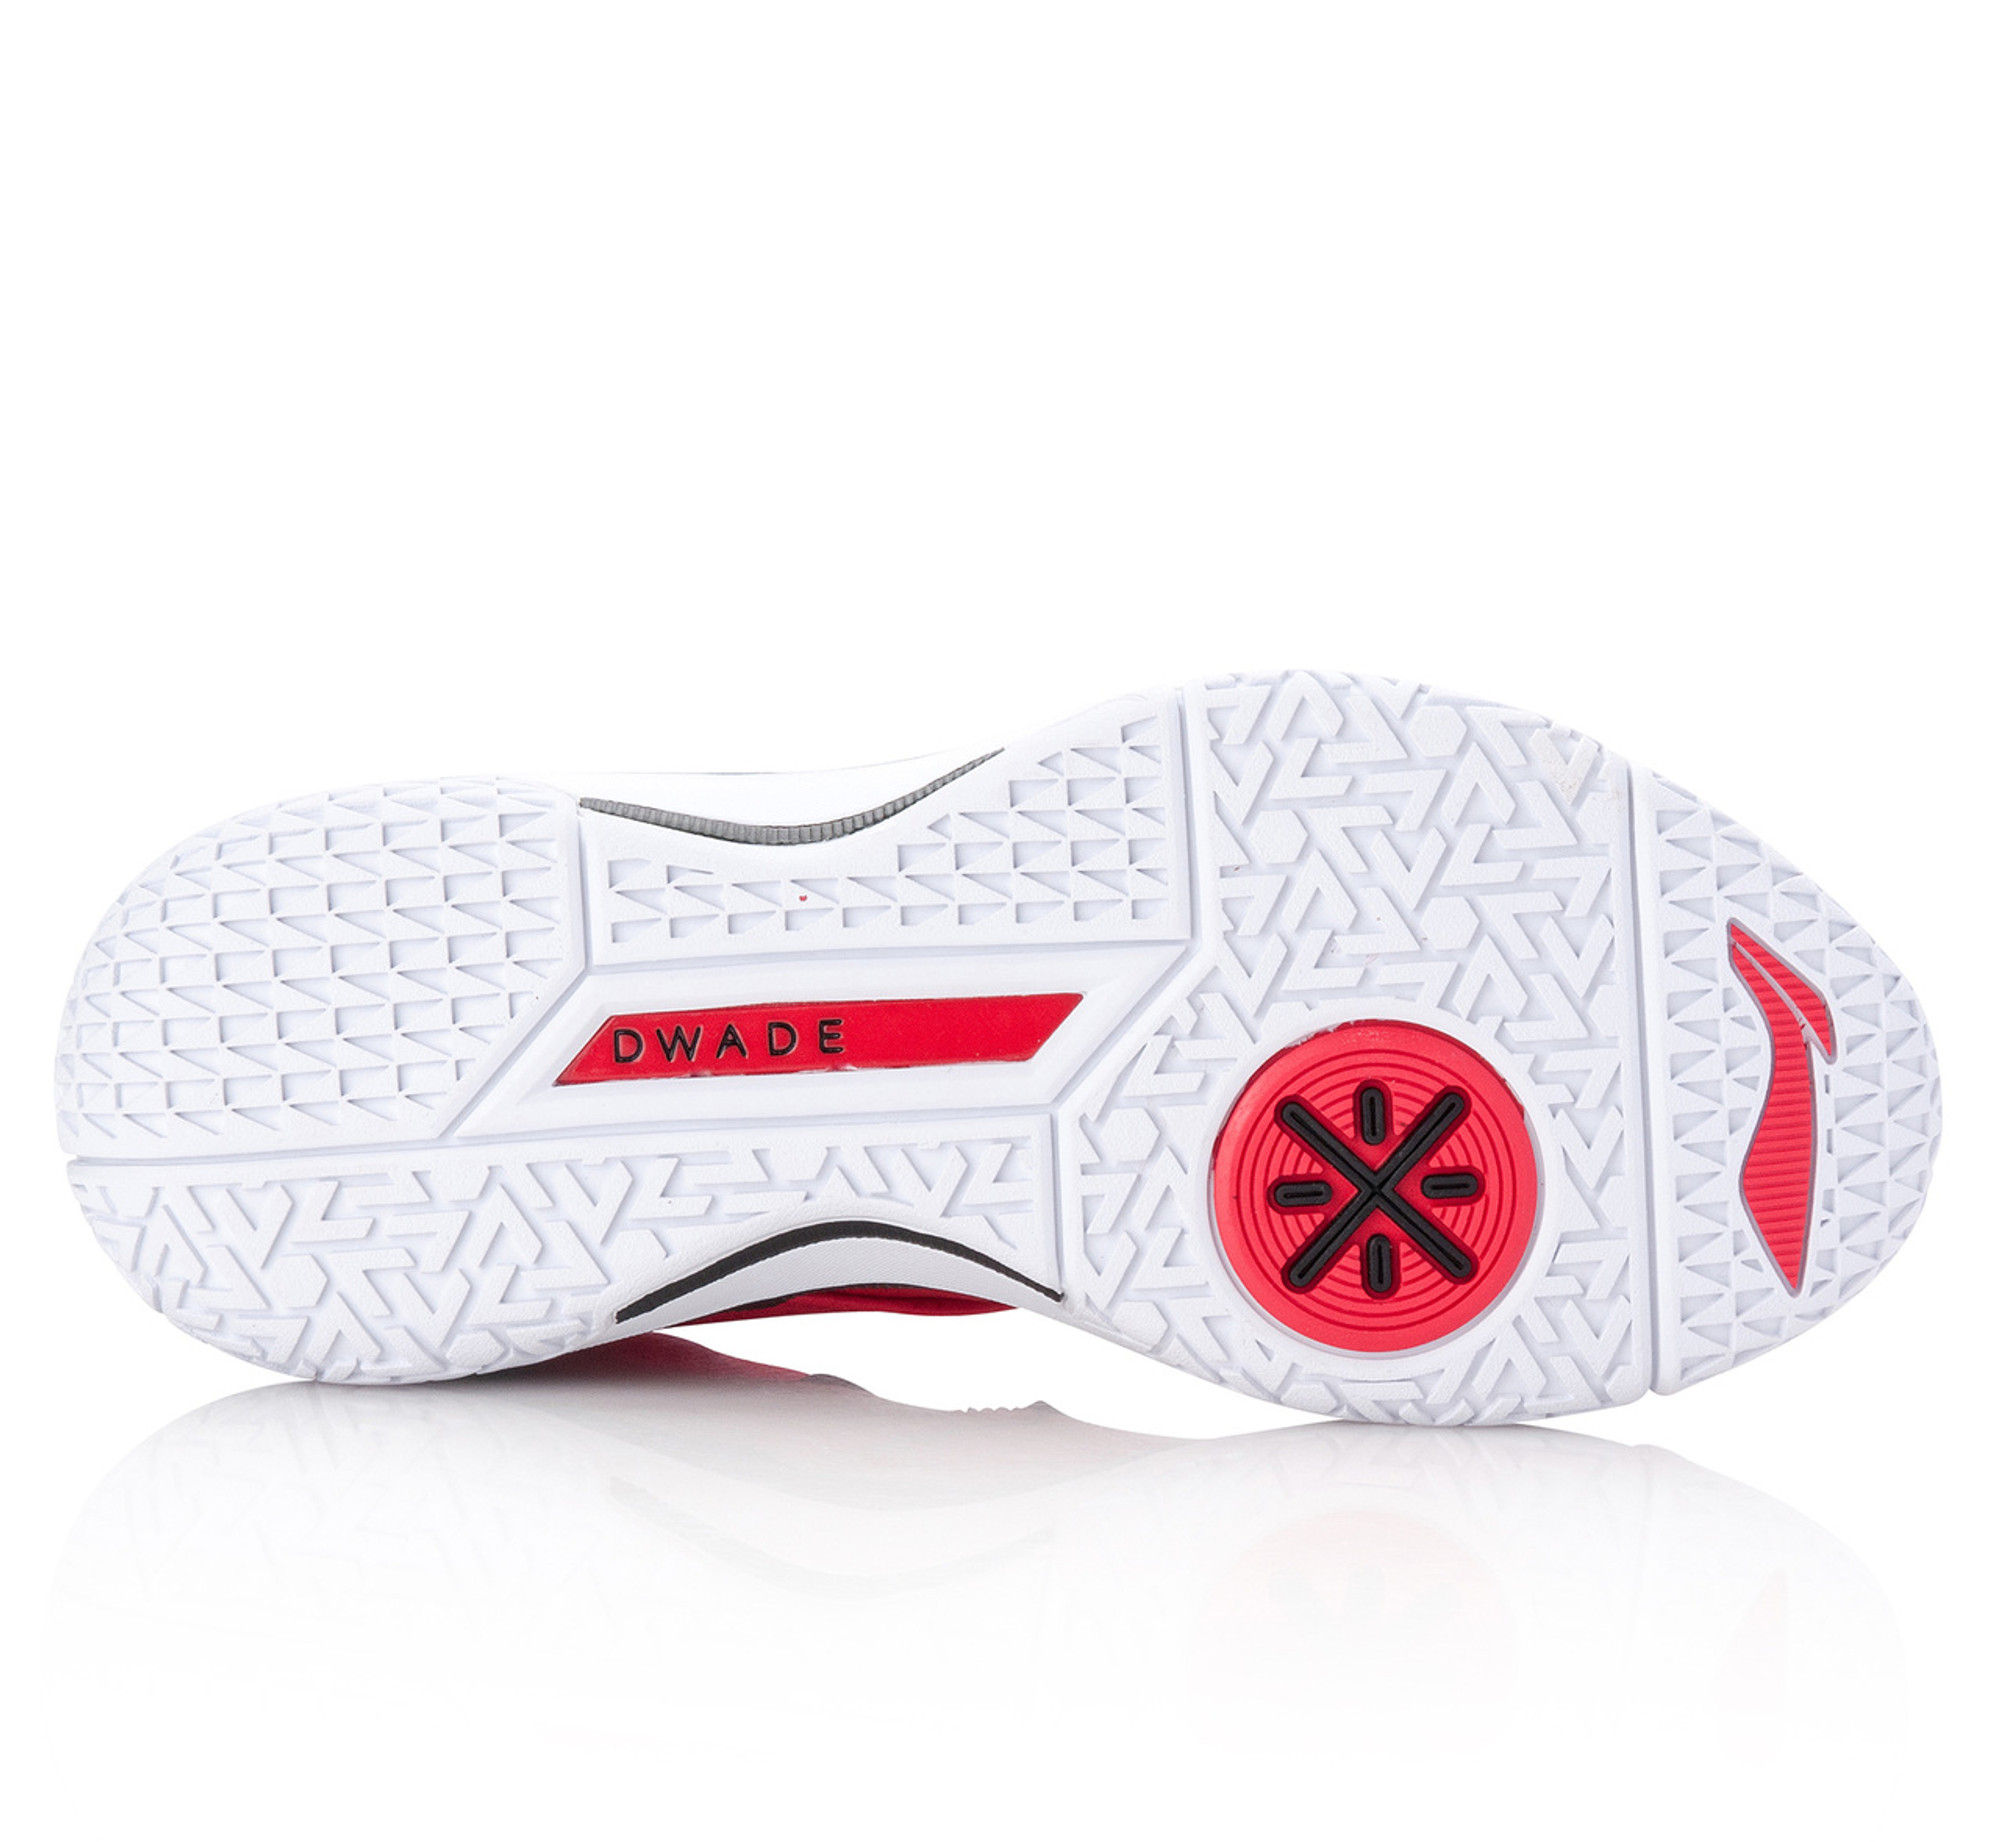 Wade All City 5.0 Red | Shop online now at Sunlight Station